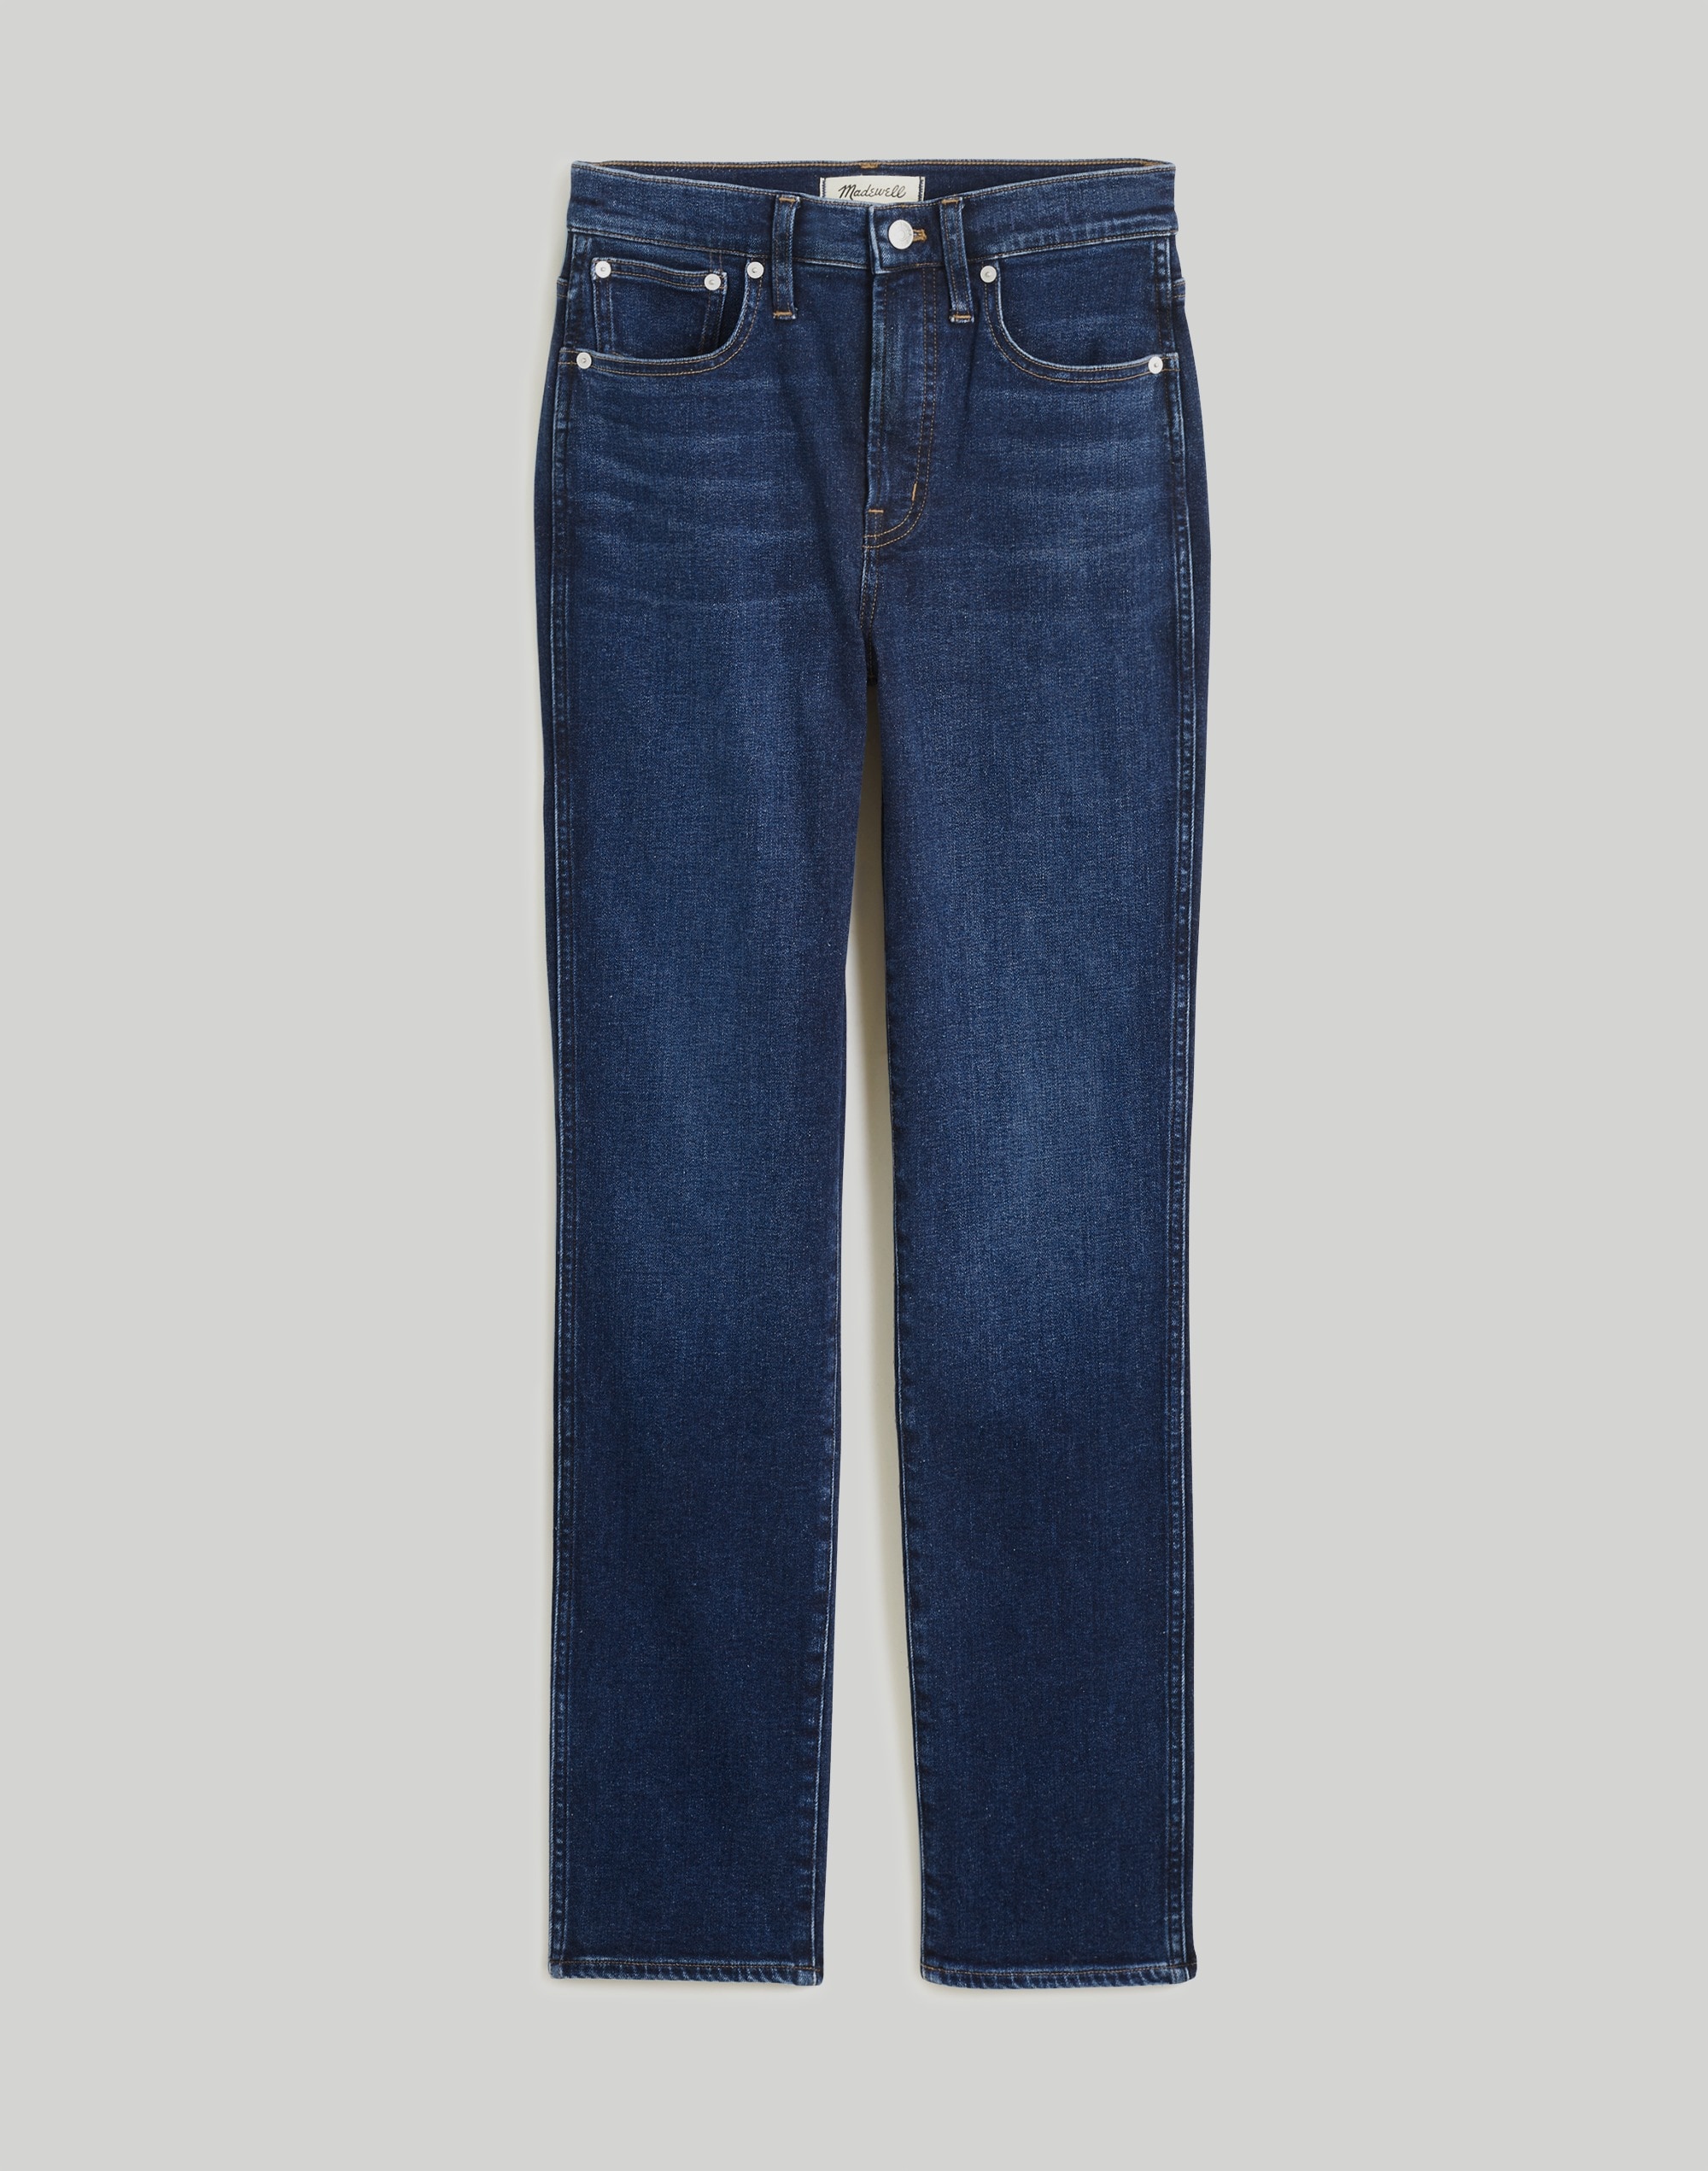 The Perfect Vintage Jean Myers Wash: Instacozy Edition